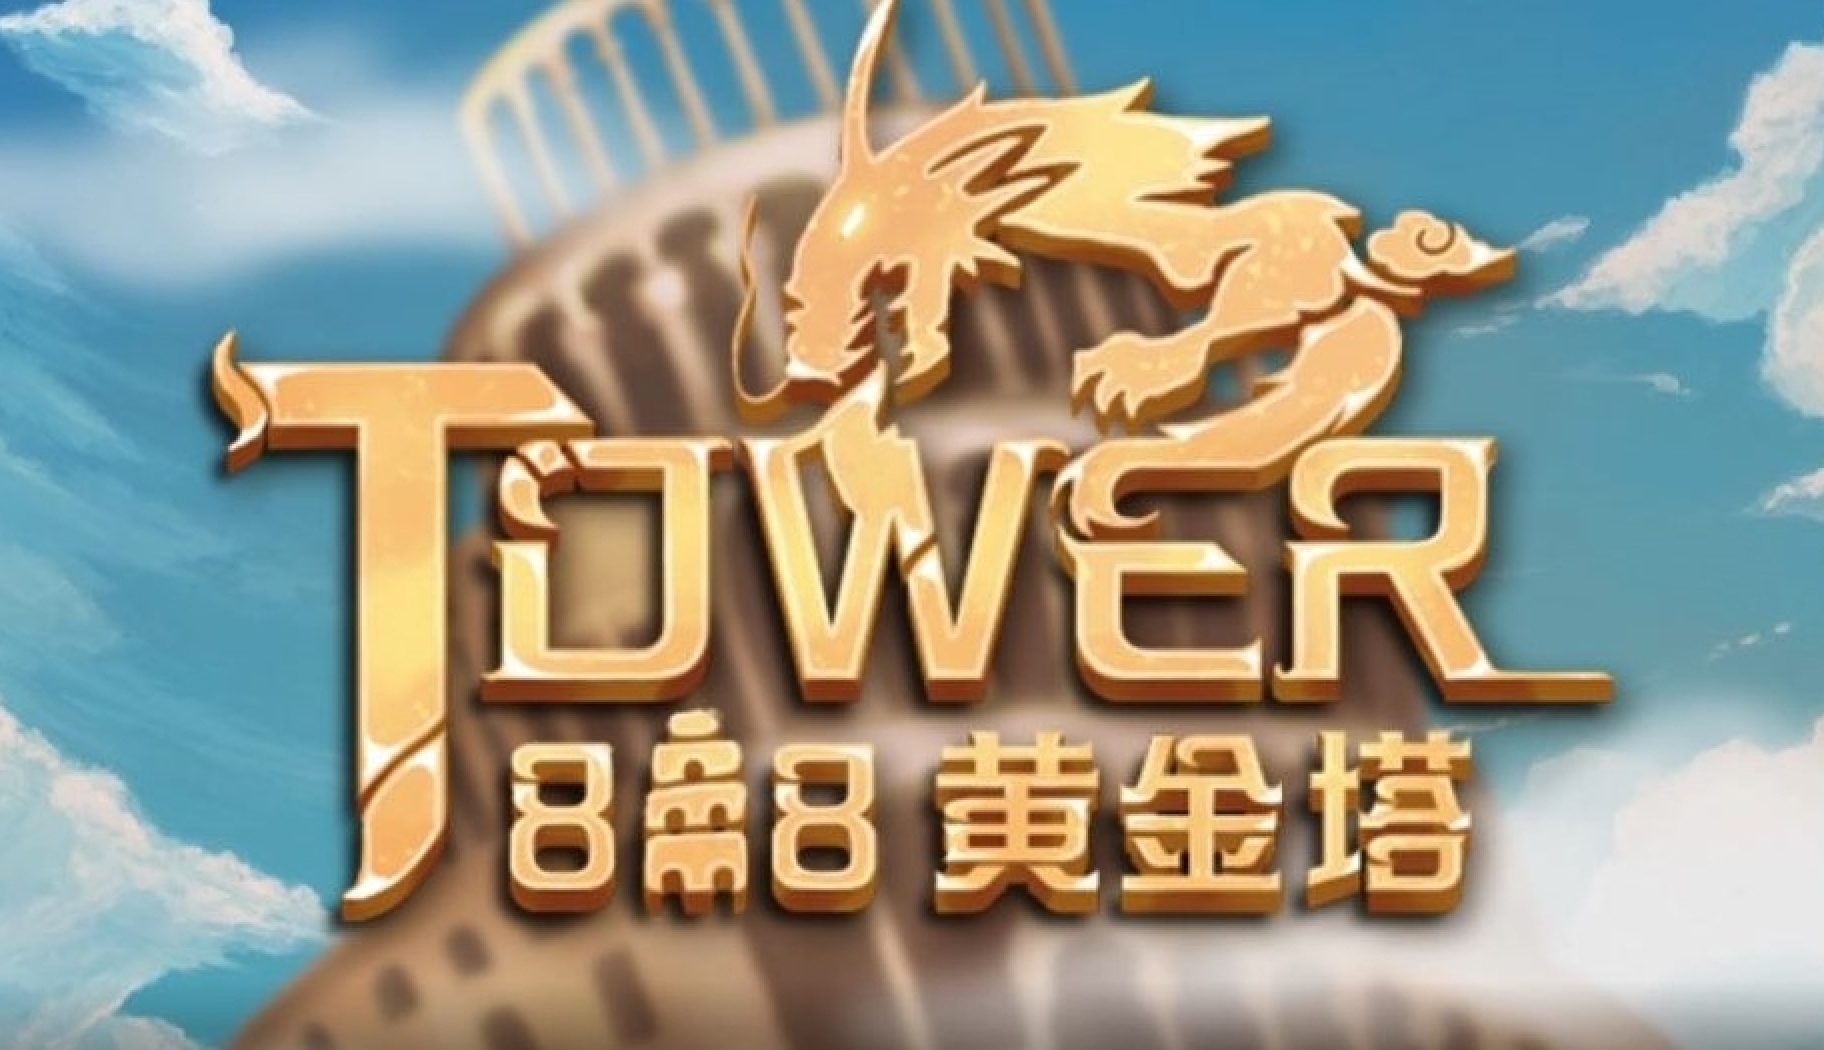 888 Tower